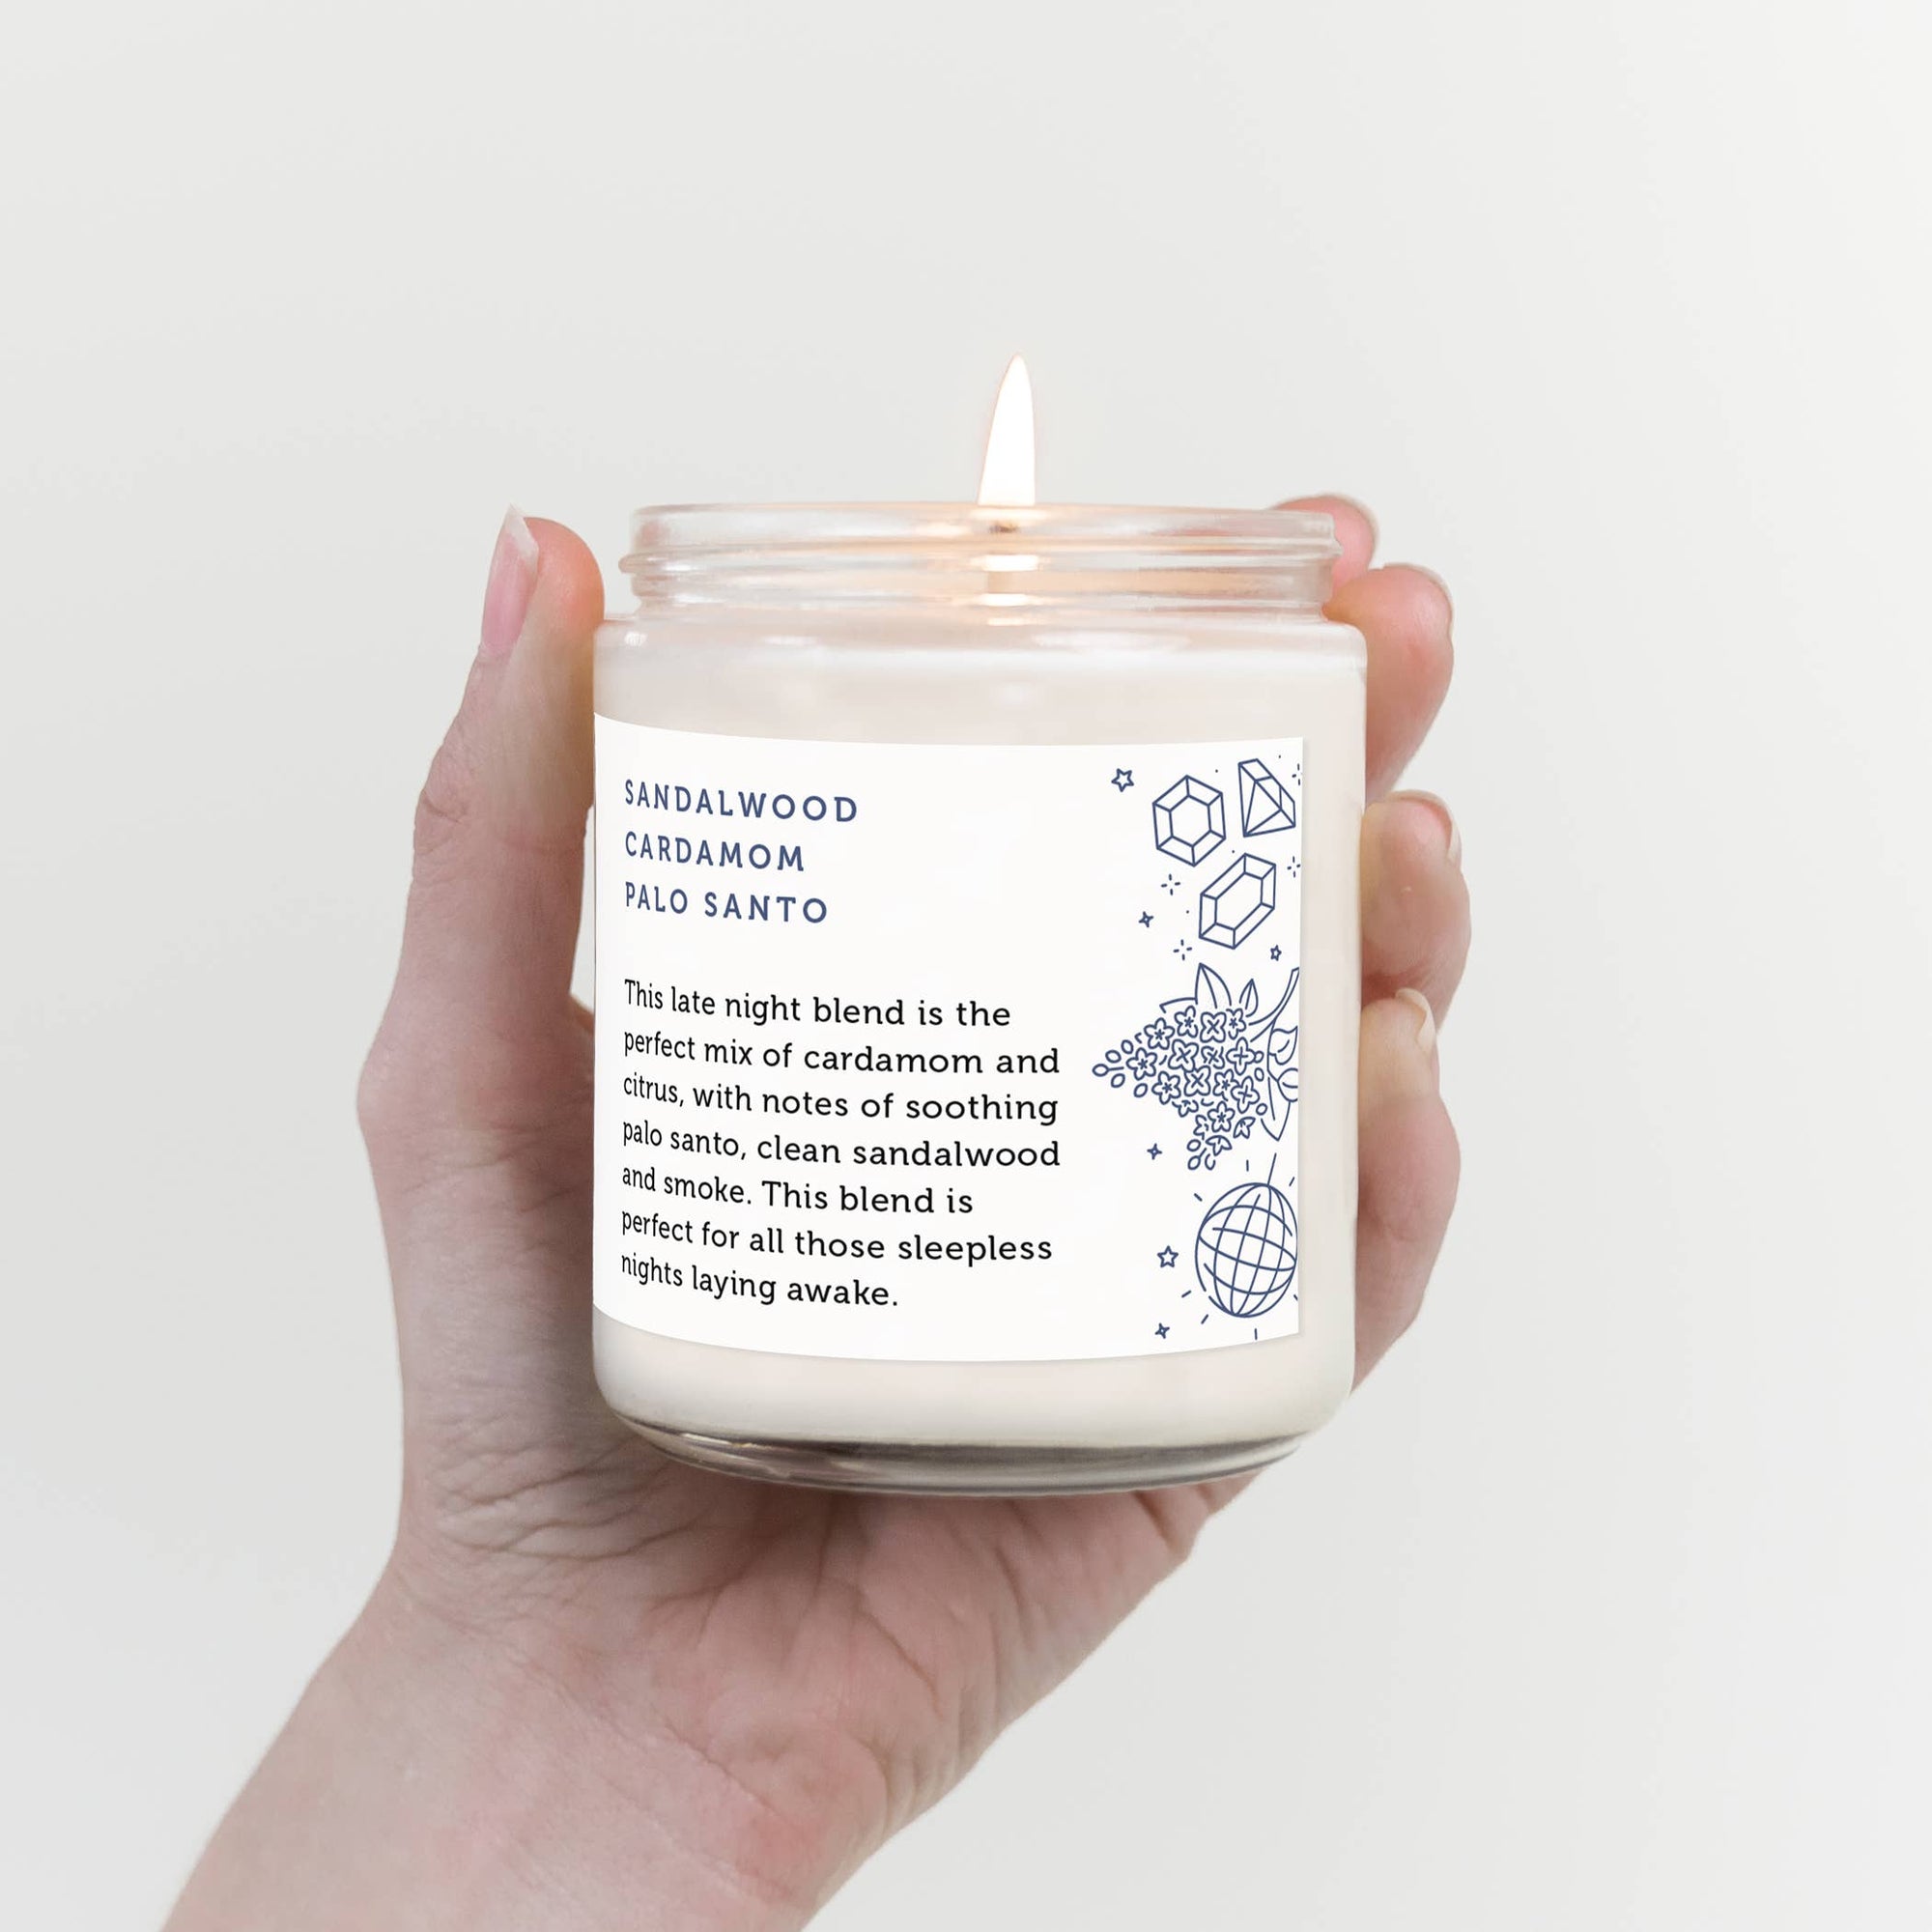 Midnights Scented Candle